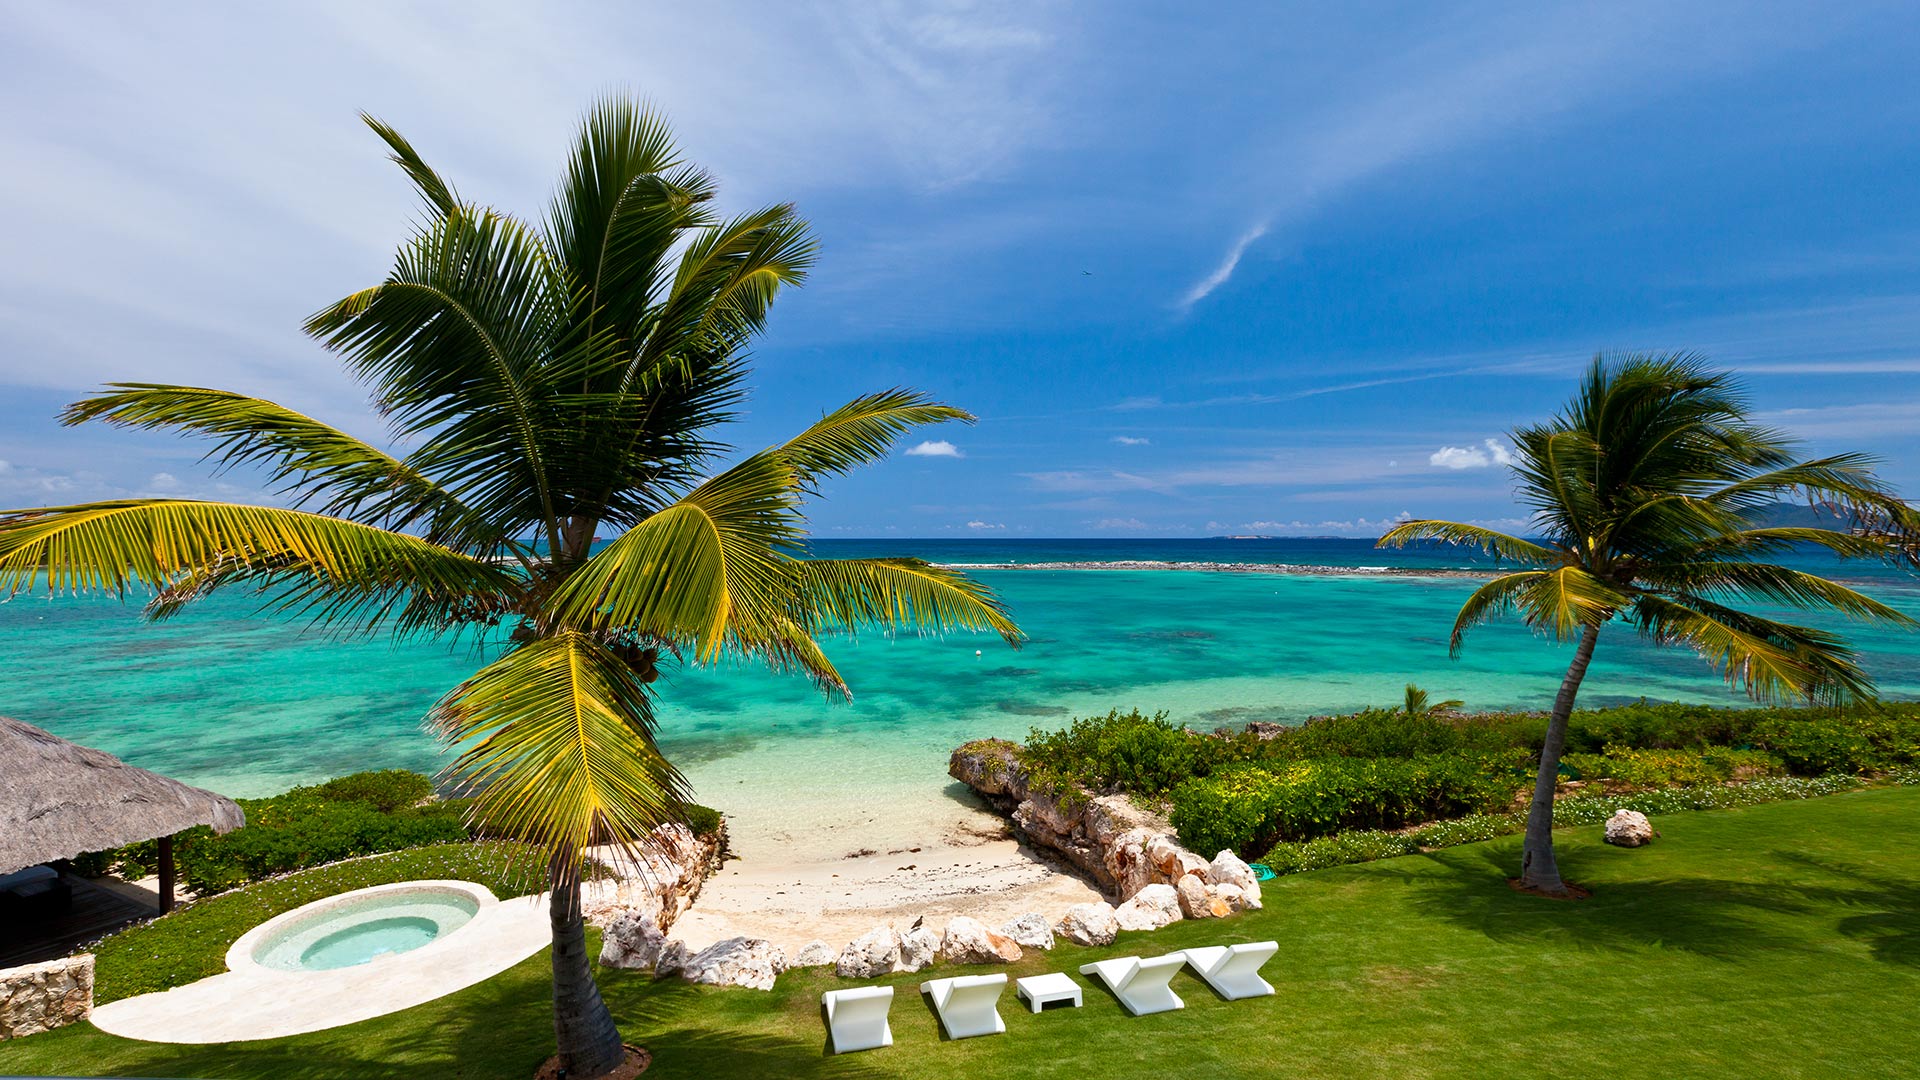 Savor Le Bleu Villa's secluded beach area with the ones you love the most.